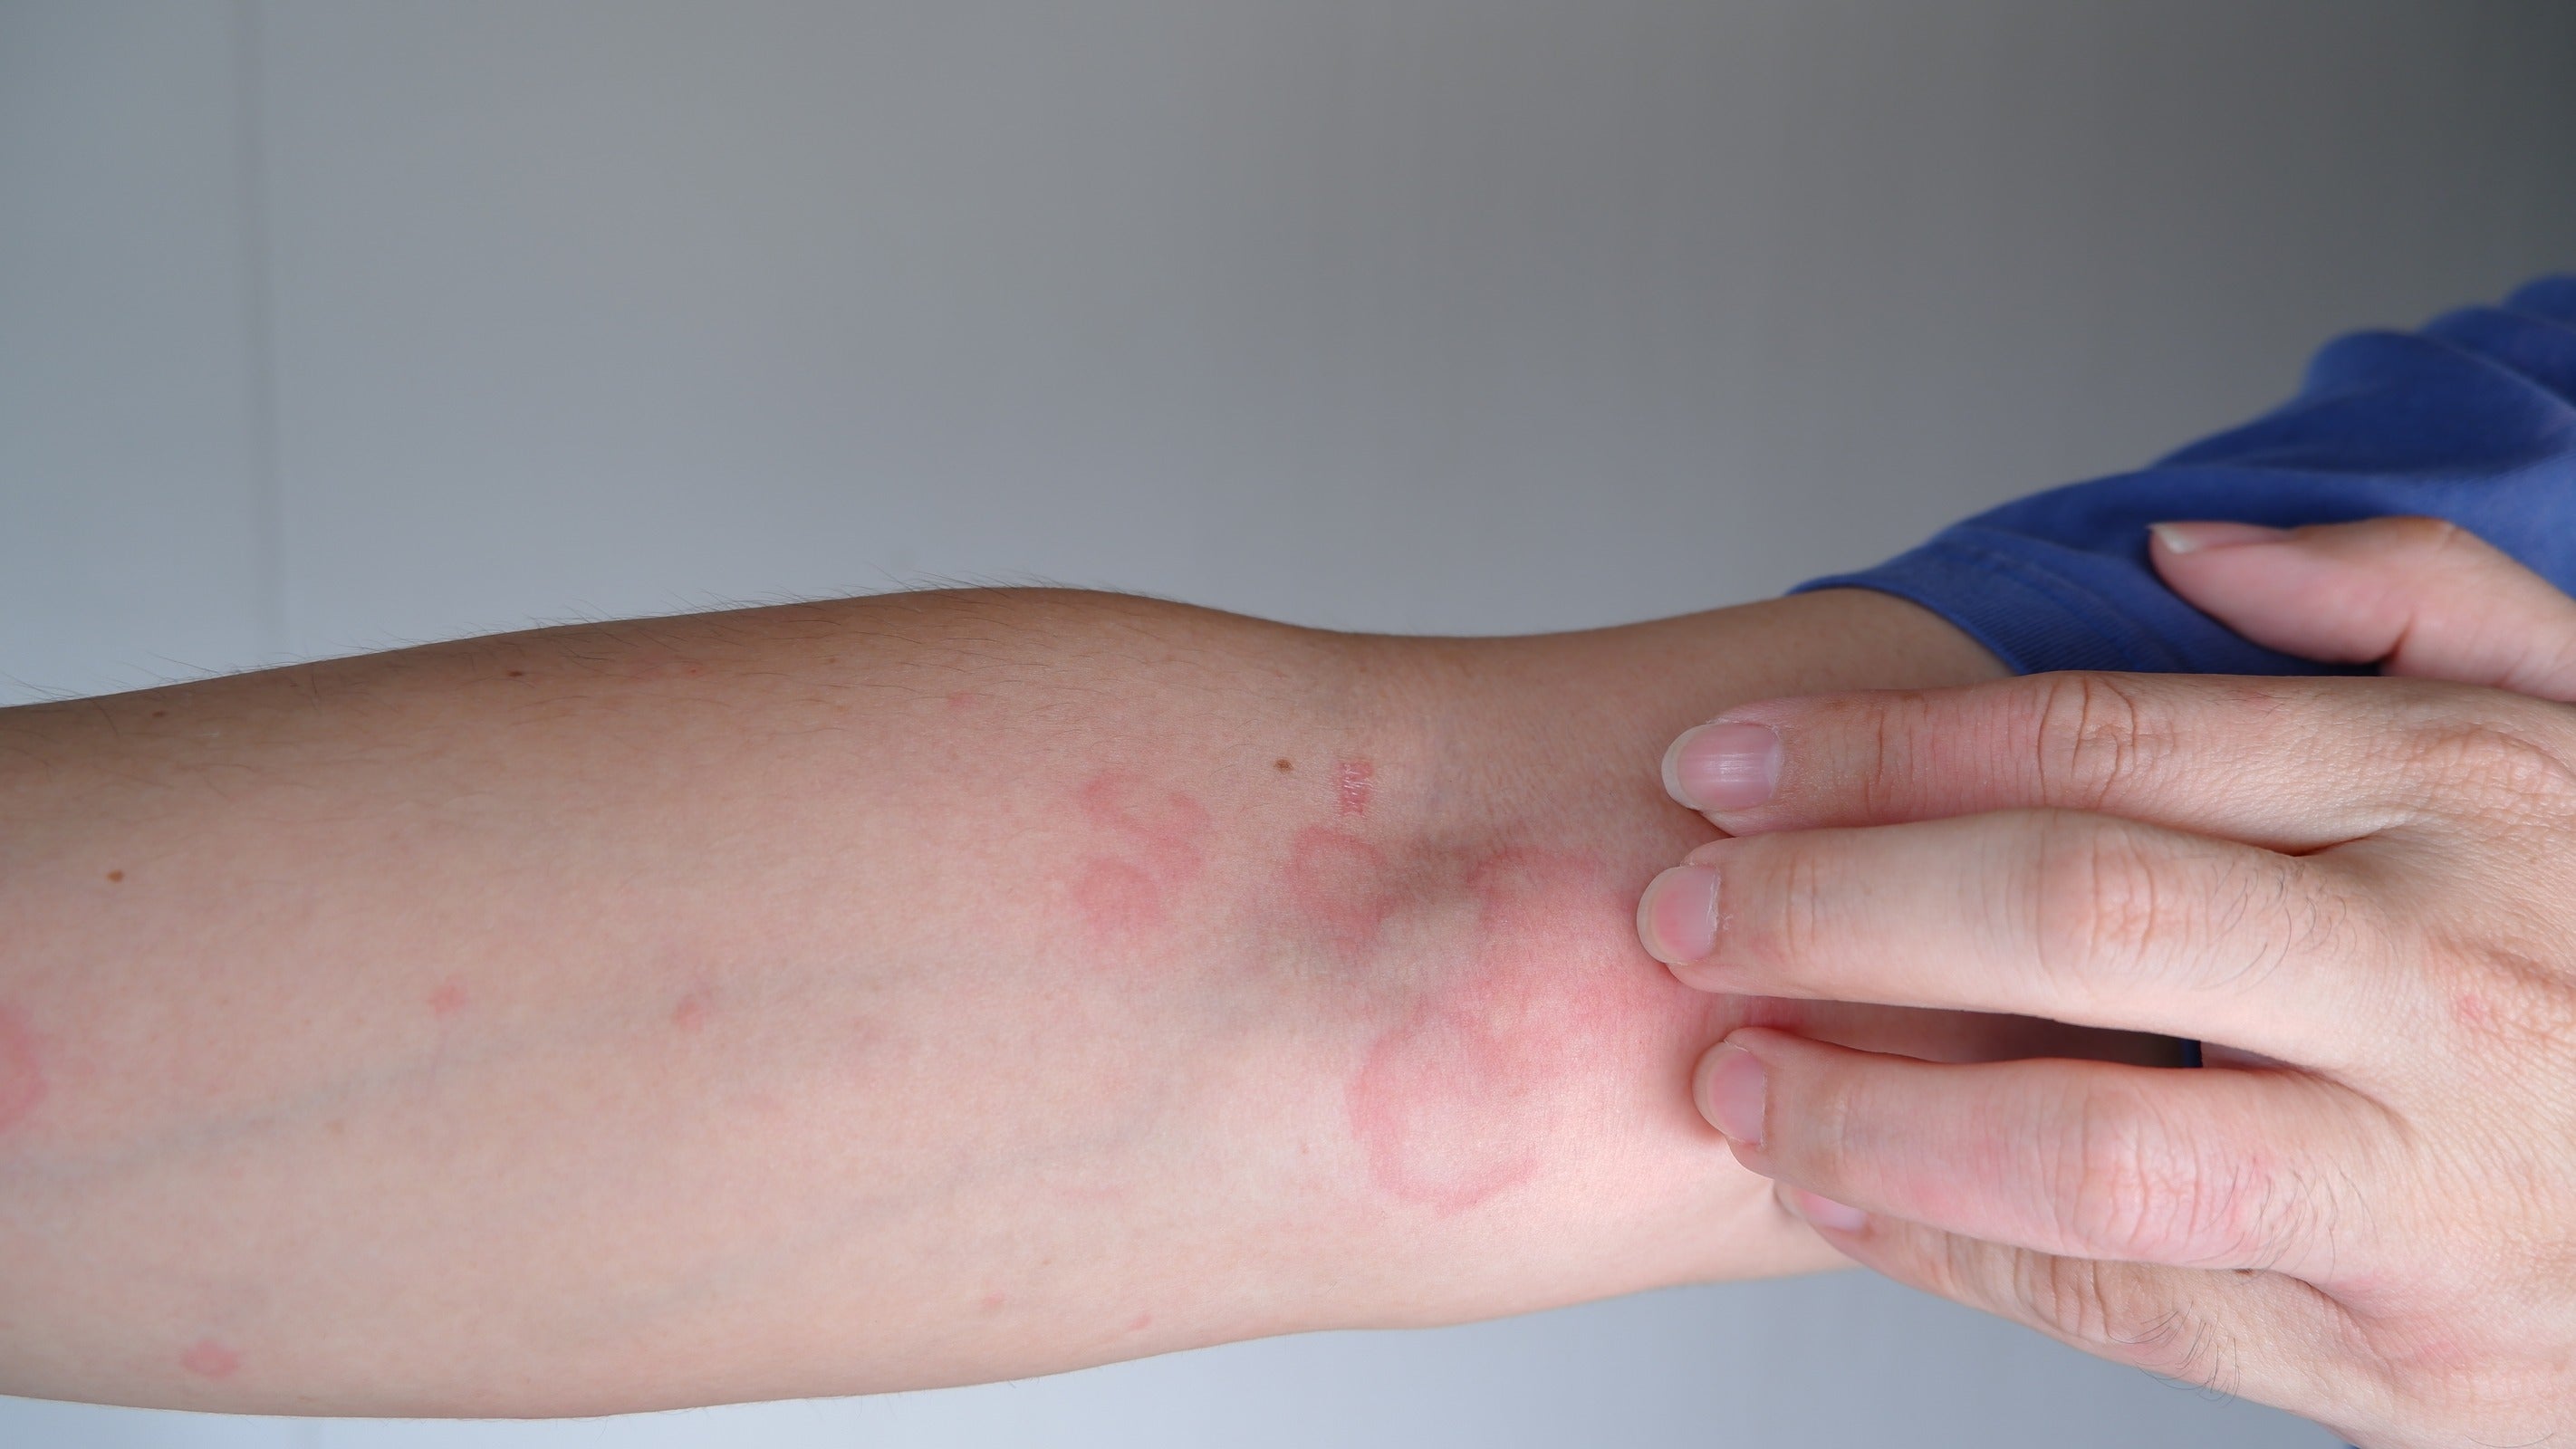 Precautions to Consider When Using Allergy Ointments